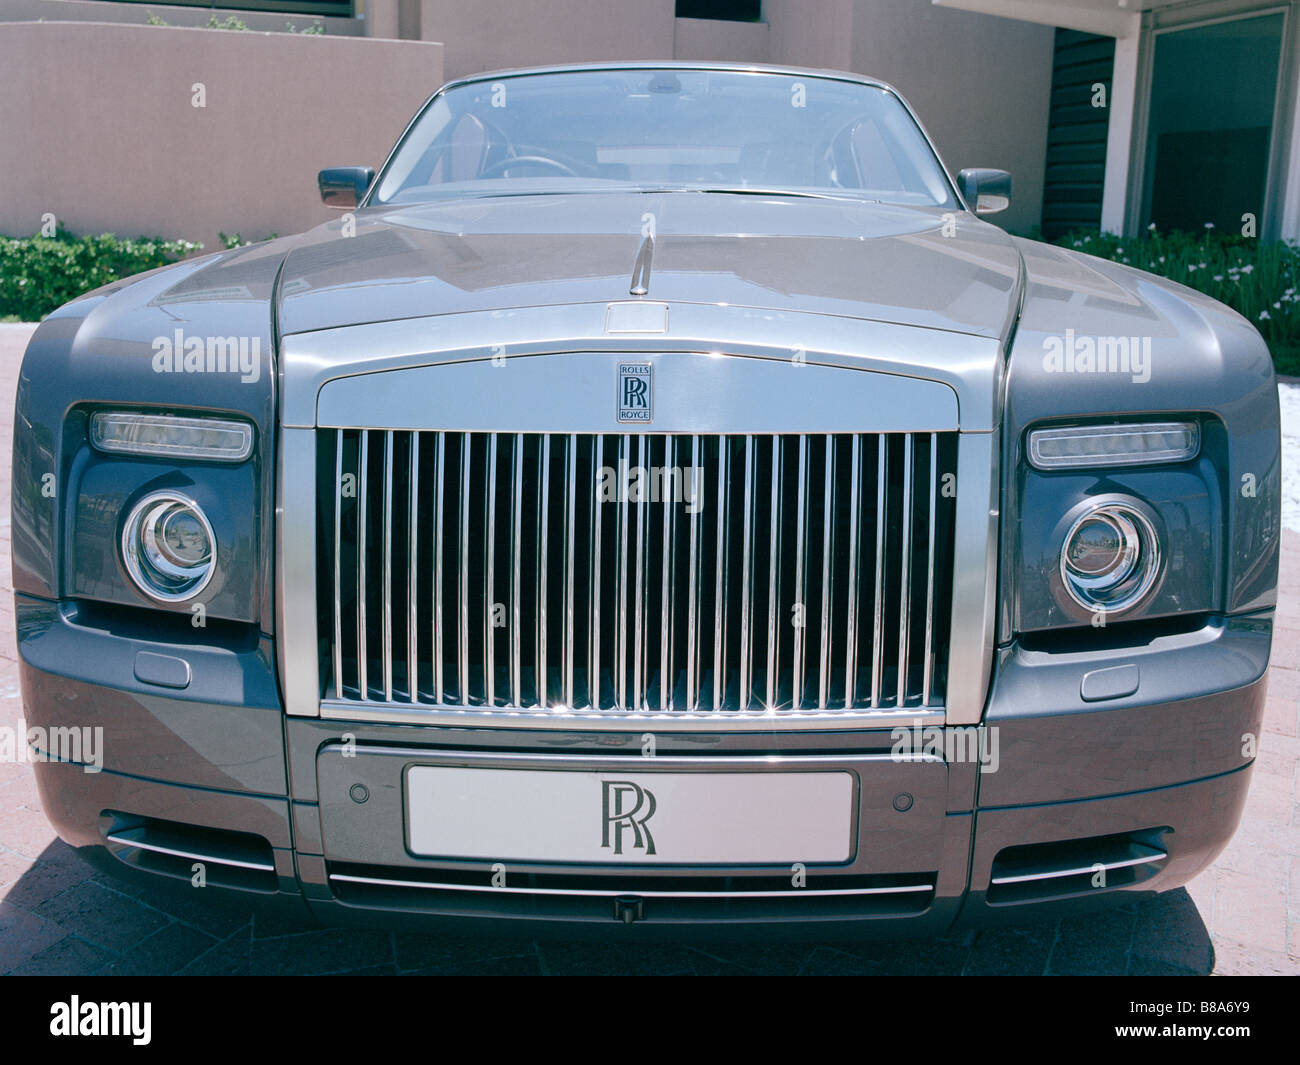 Rolls Royce Car in Cape Town in South Africa in Sub Saharan Africa. Wealth Wealthy Rich Life Lifestyle Stock Photo